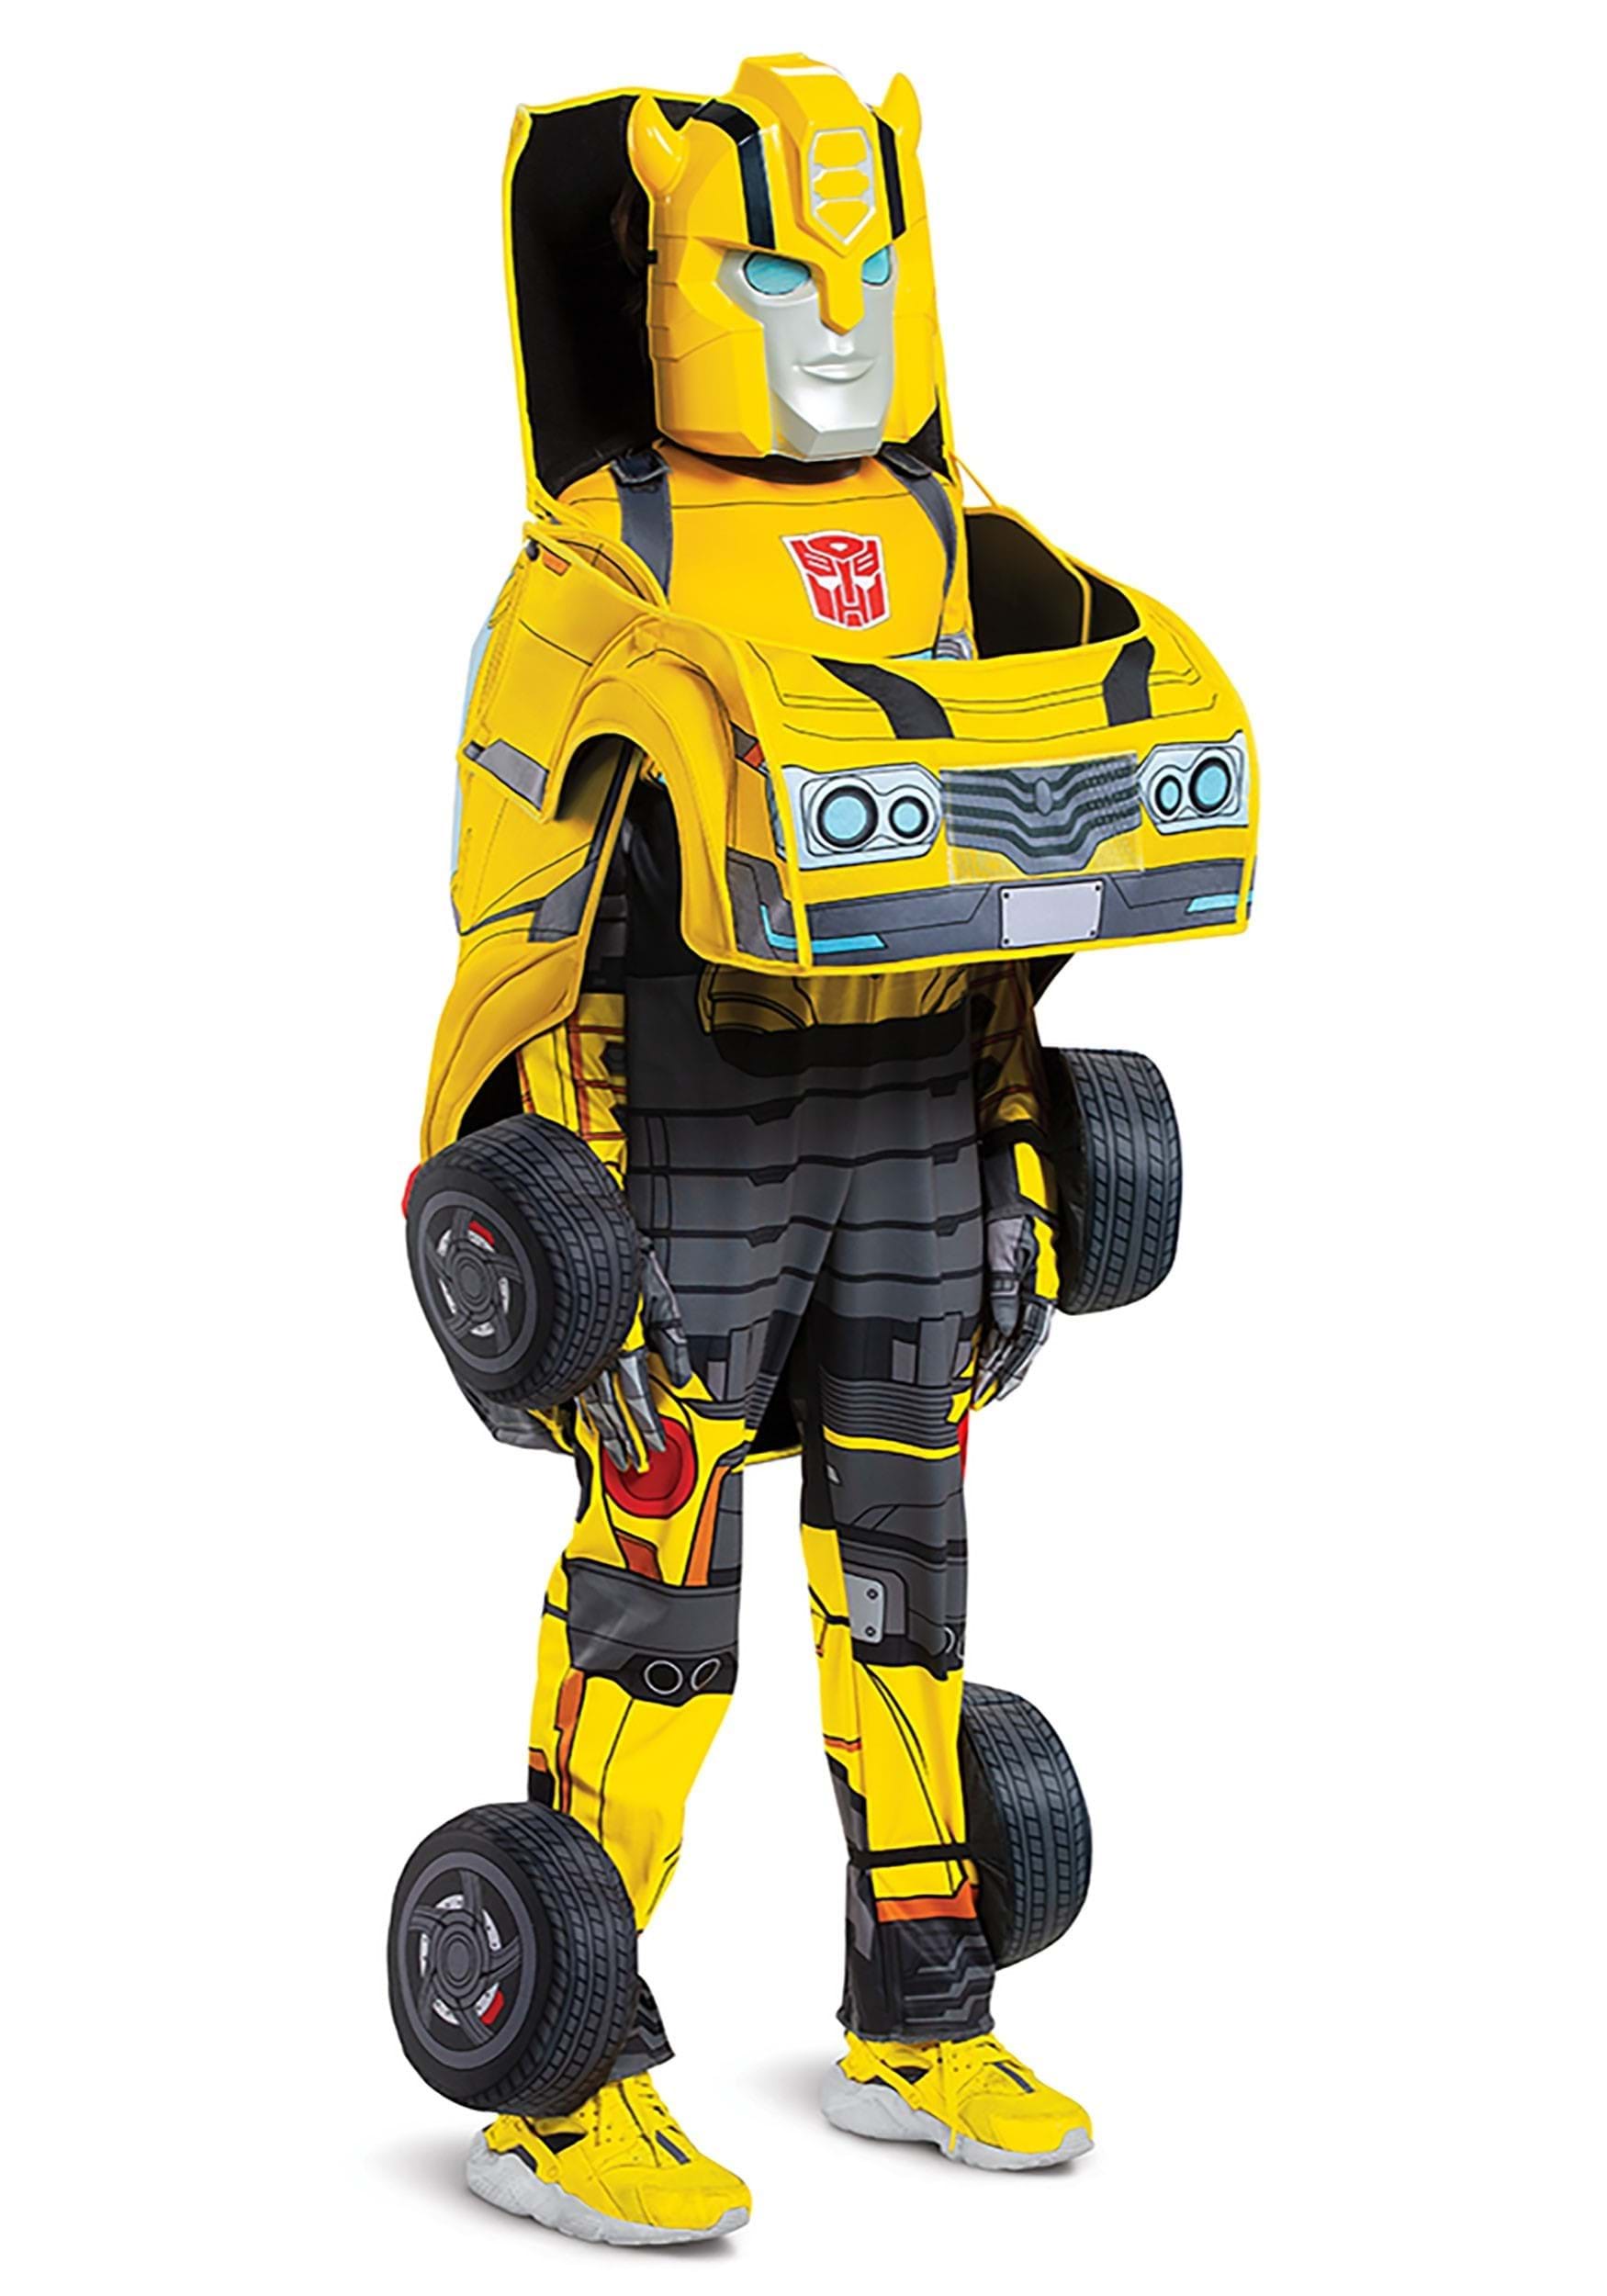 Image of Transformers Bumblebee Converting Halloween Costume for Kids ID DI103509-7/8